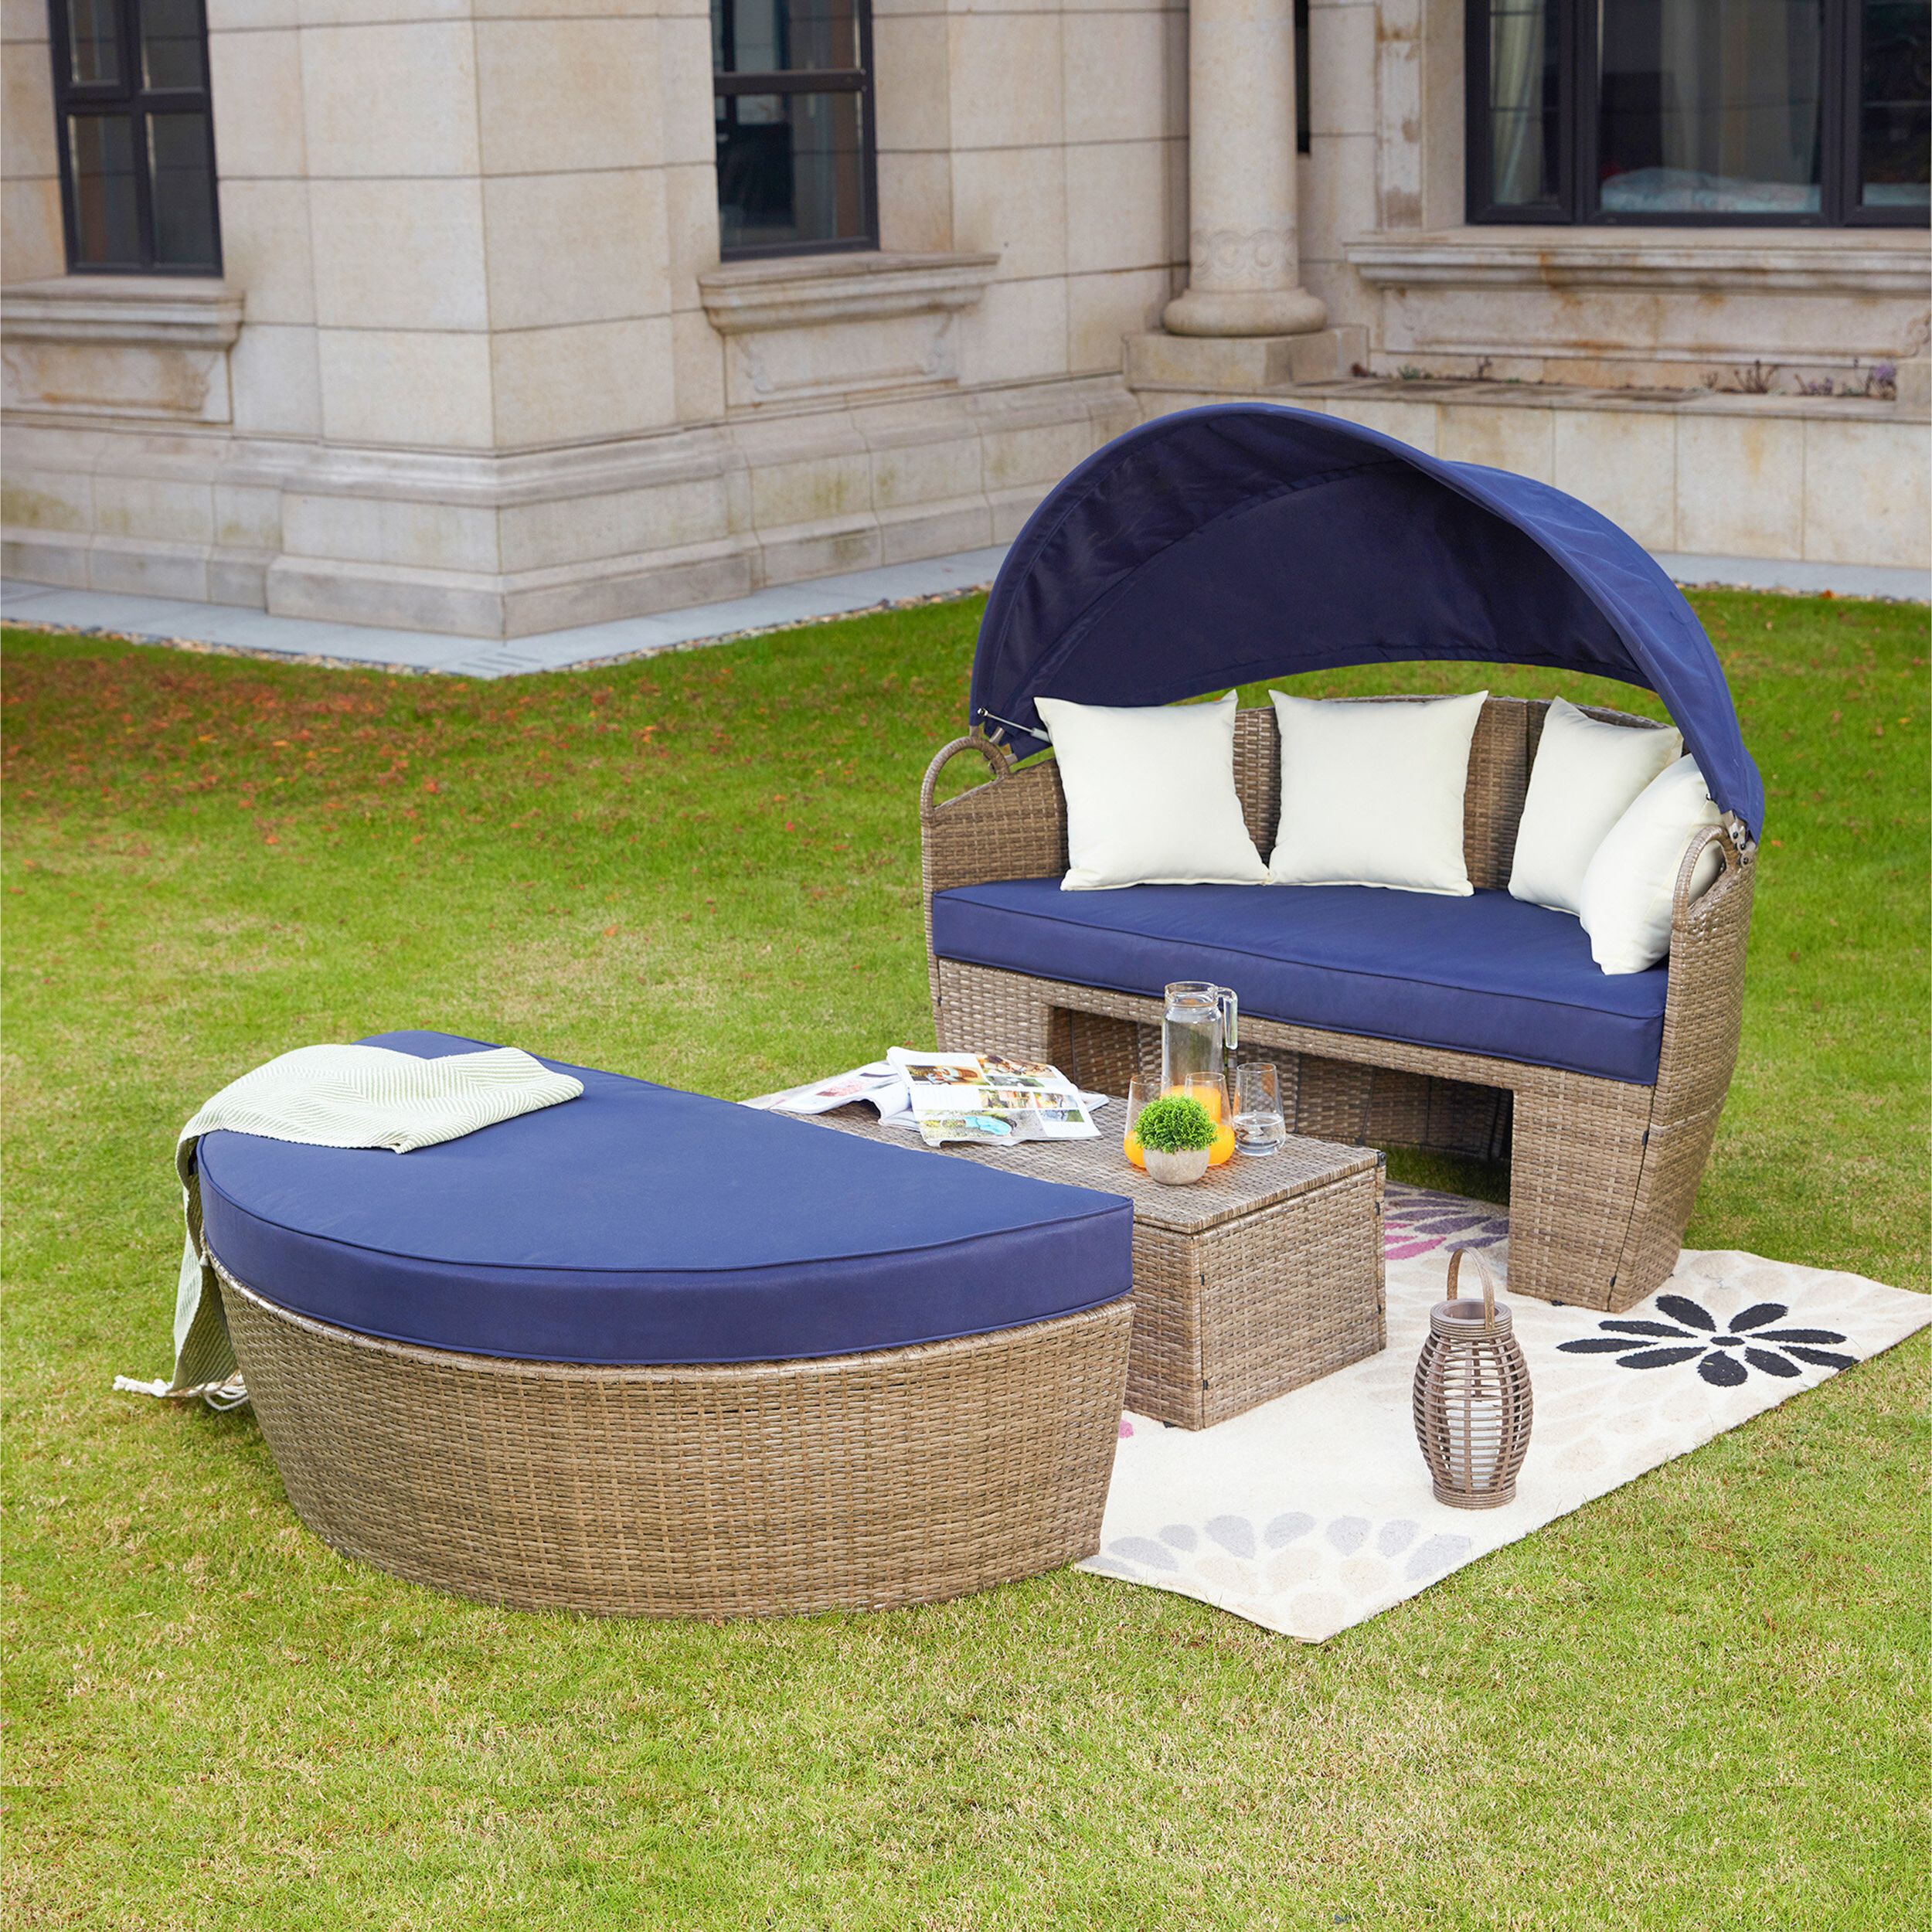 Popular Fansler Patio Daybed With Cushions Inside Brentwood Canopy Patio Daybeds With Cushions (View 17 of 25)